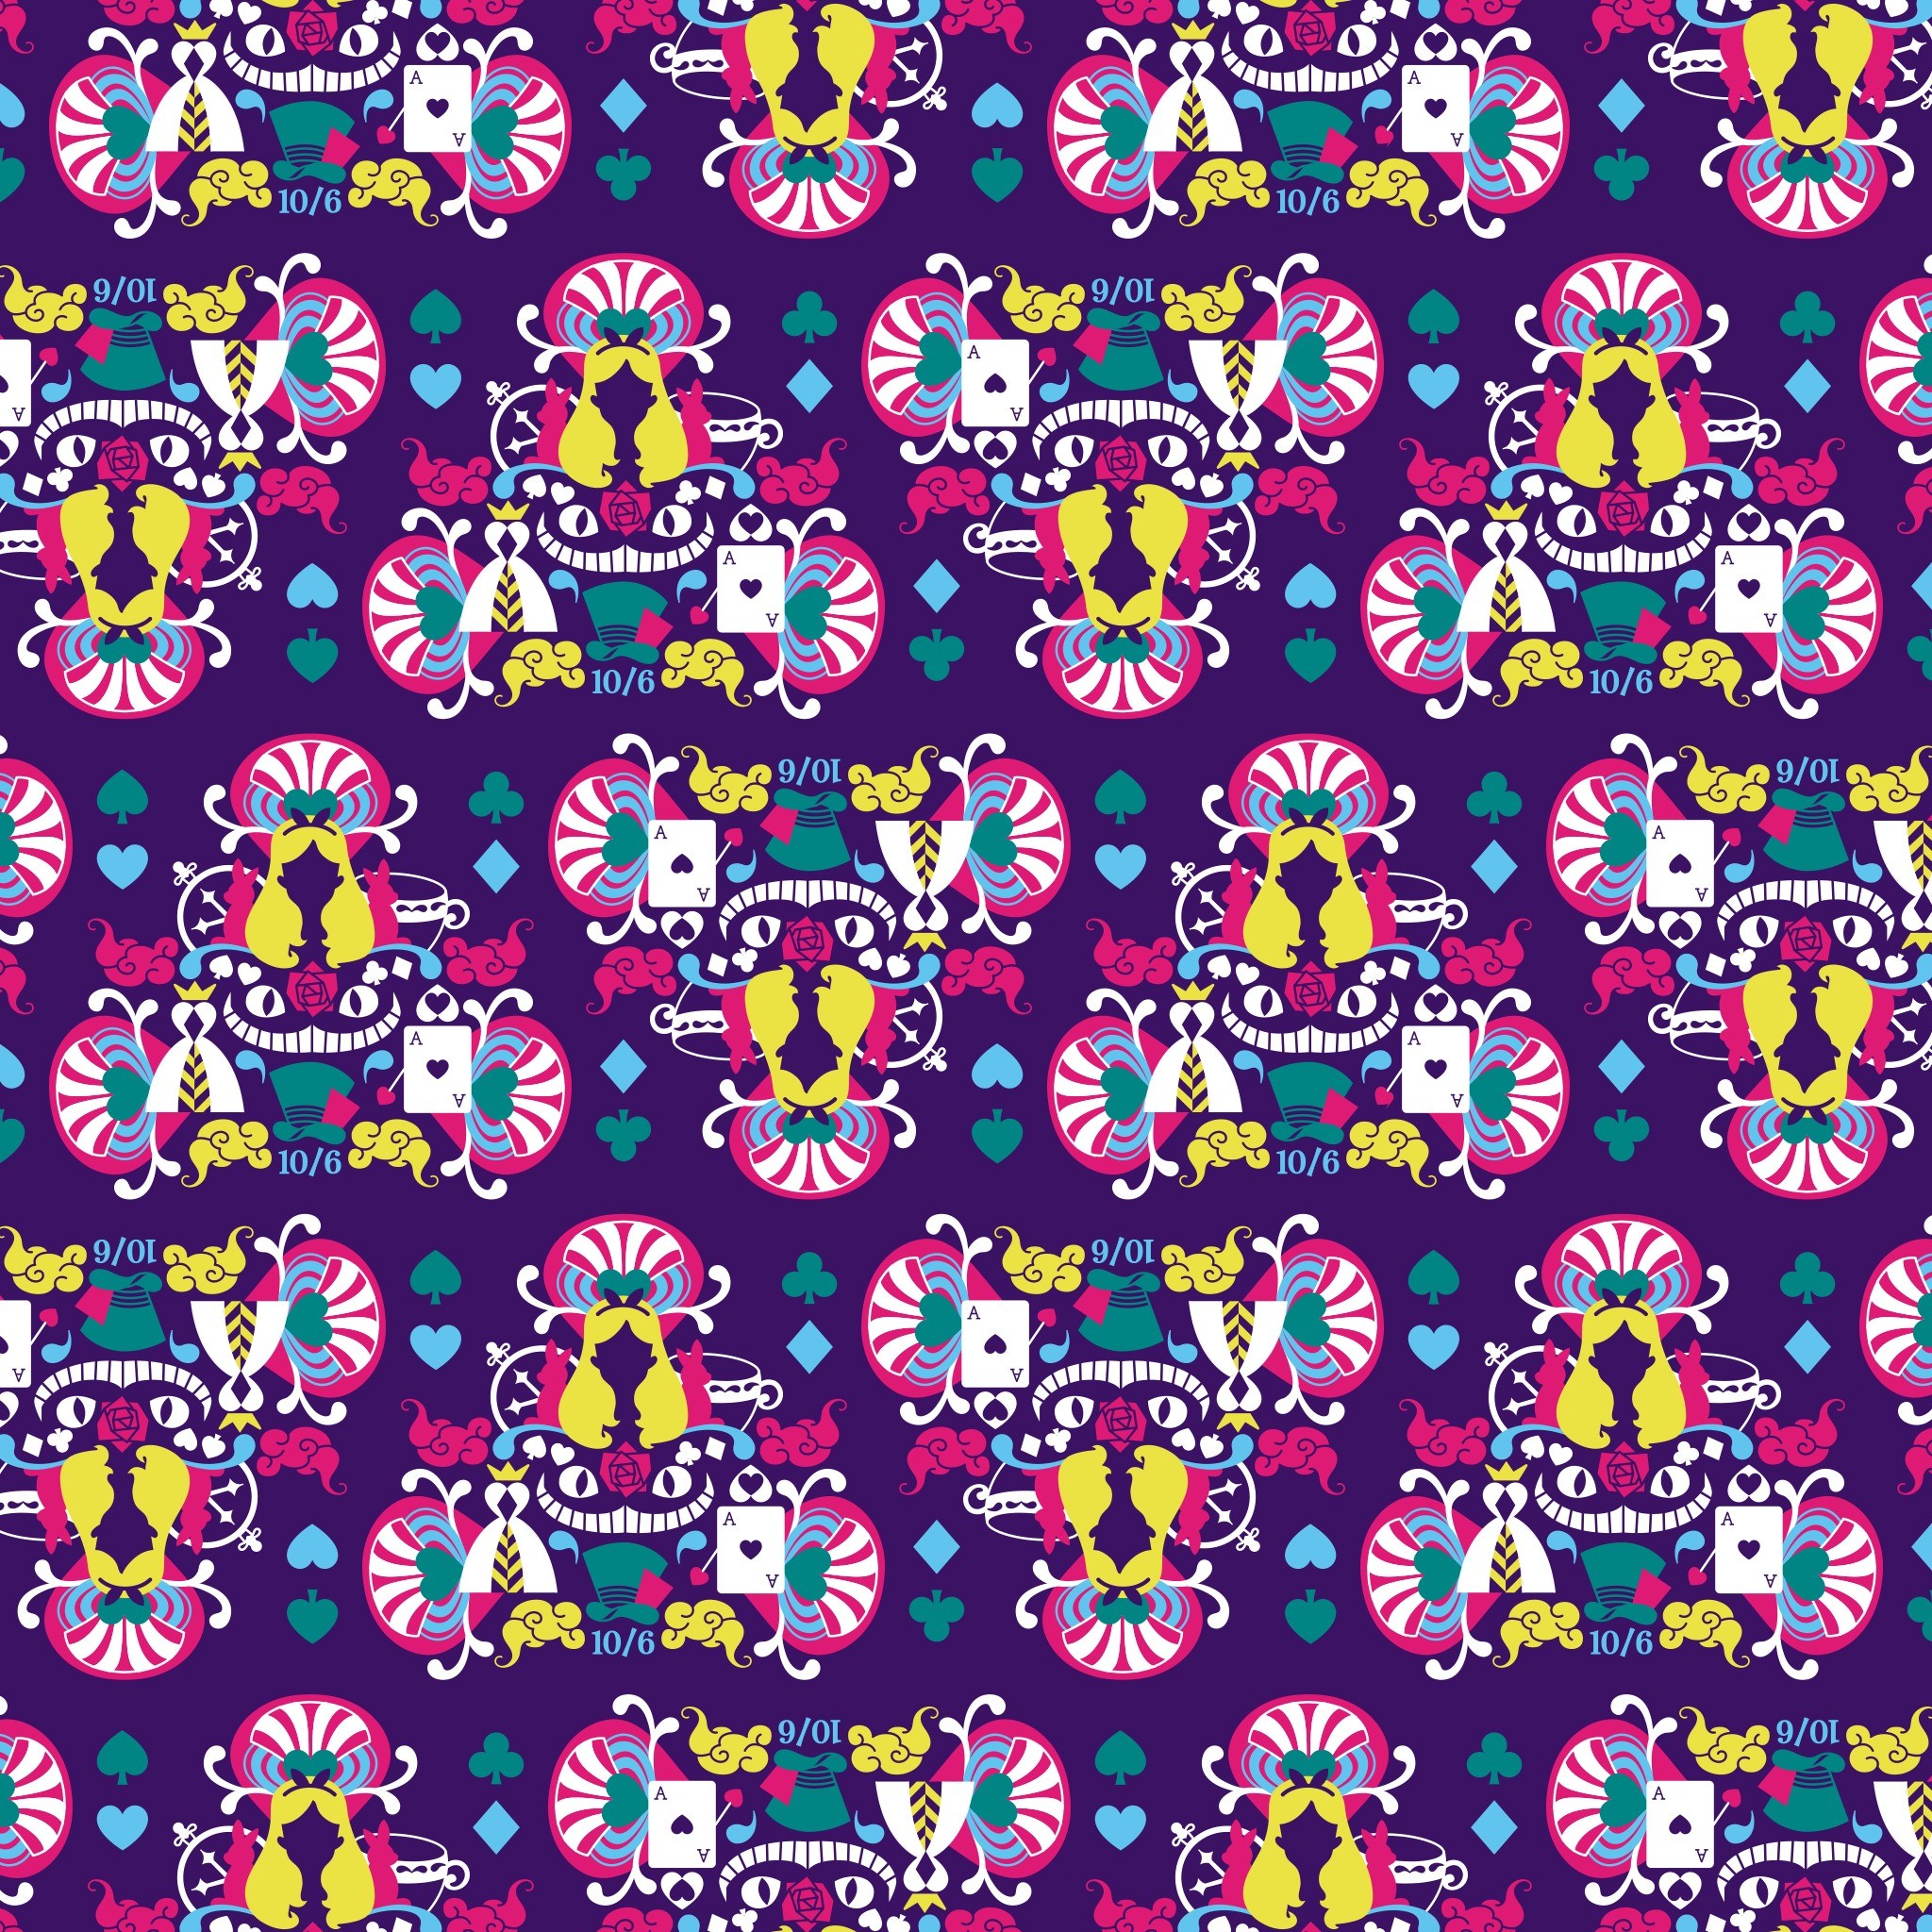 2048x2048 These Alice in Wonderland iPad and iPhone wallpapers capture all the whimsy  and fun of this